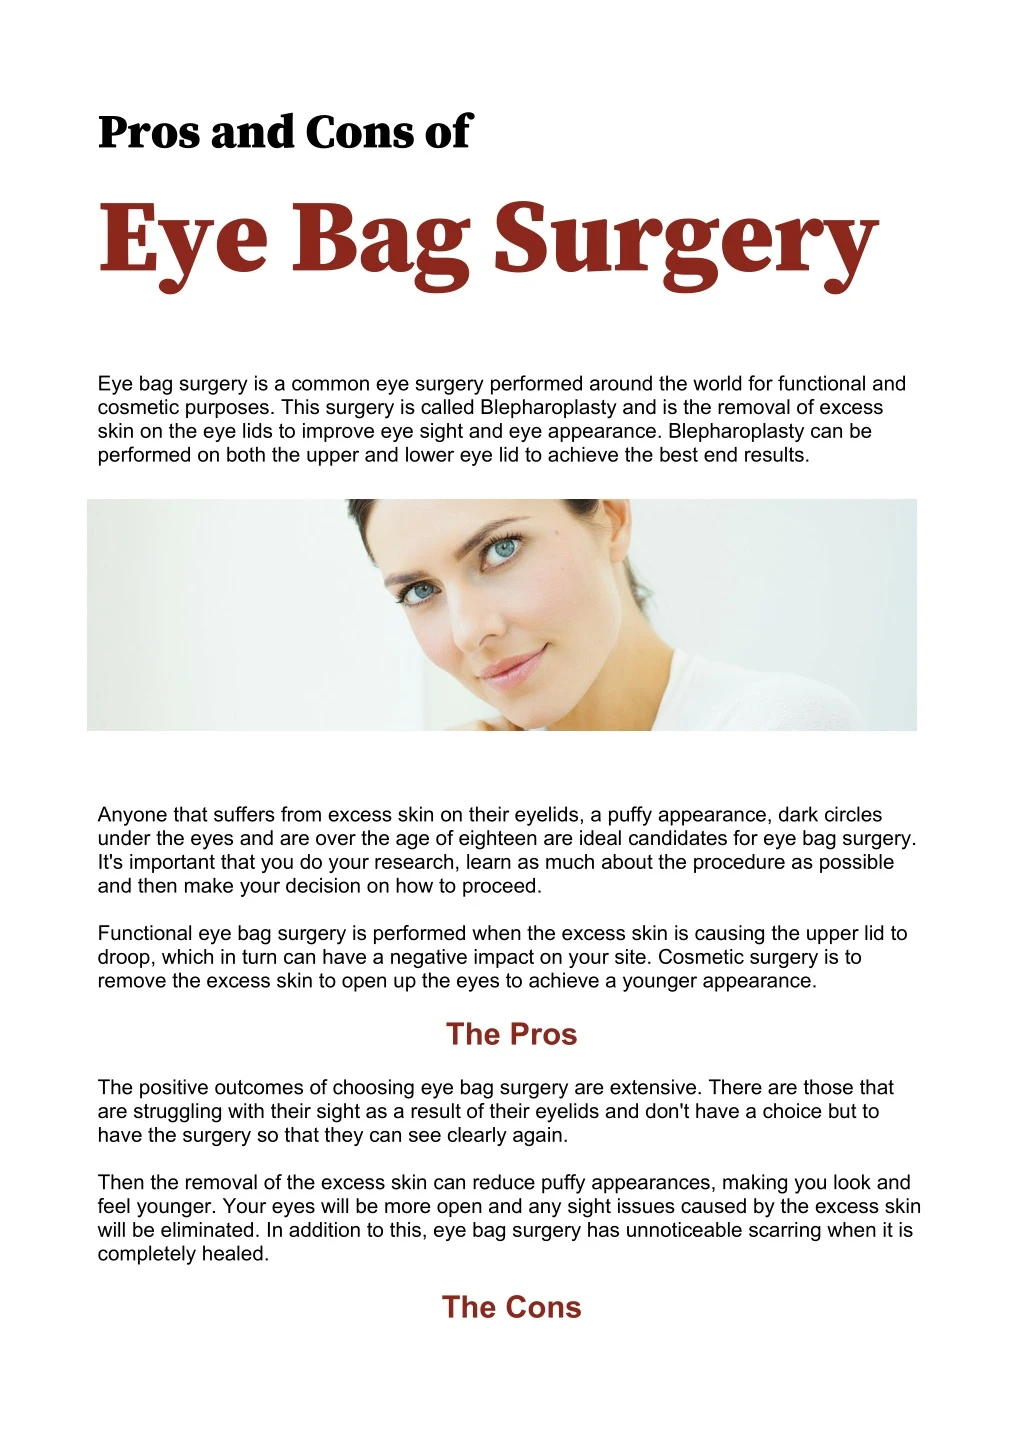 pros and cons of eye bag surgery